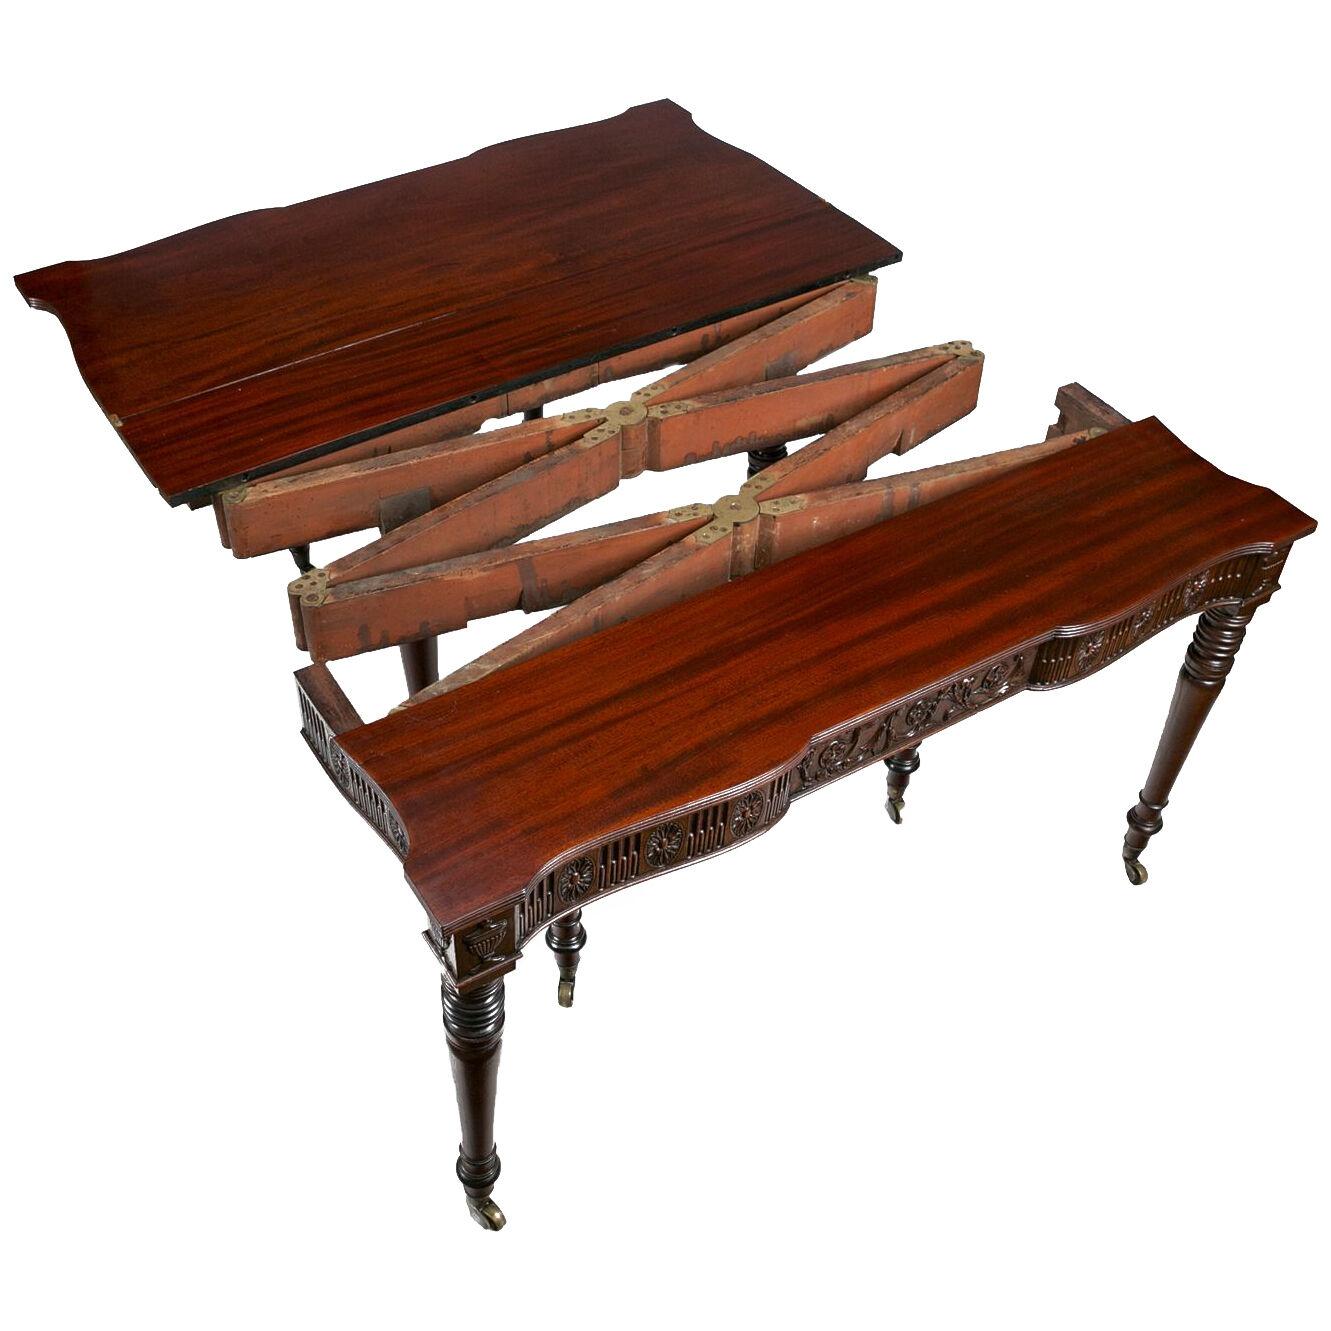 Early 19th Century Regency Concertina Extendable Dining Table